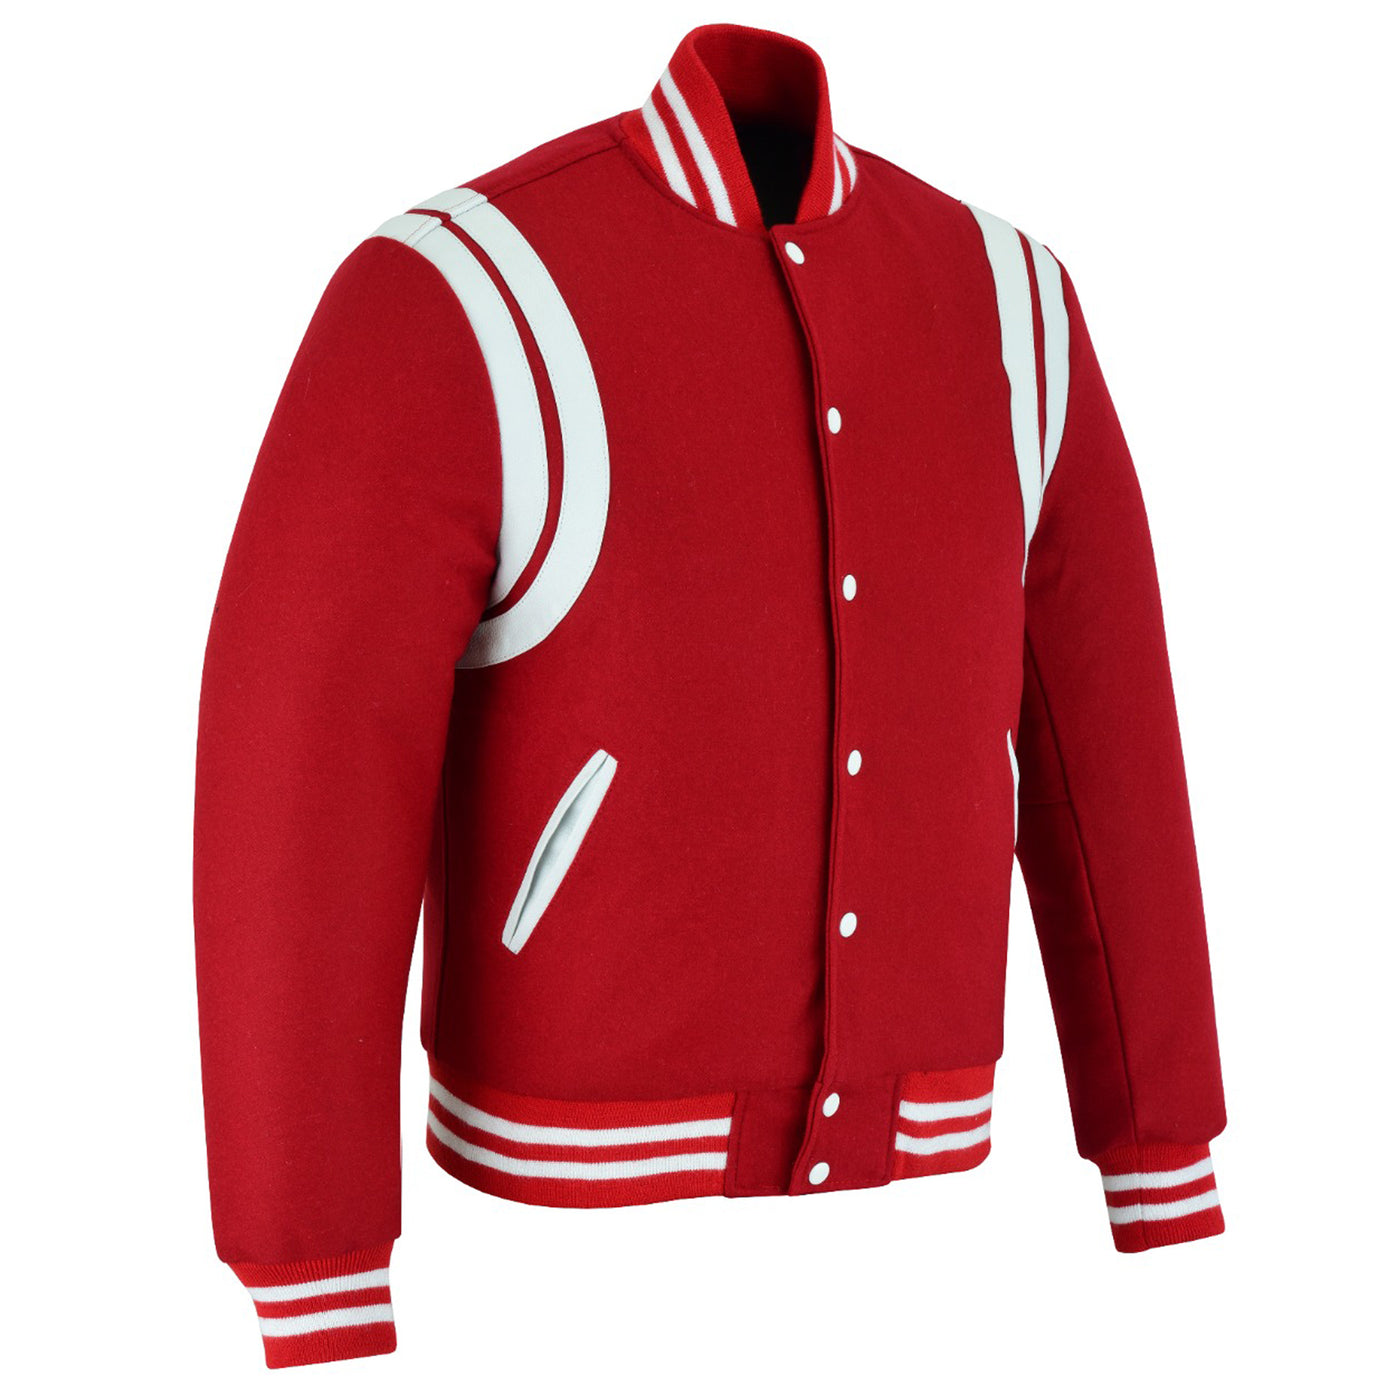 Classic Varisty Letterman Baseball College Jacket Red Wool with White Double Leather Strip